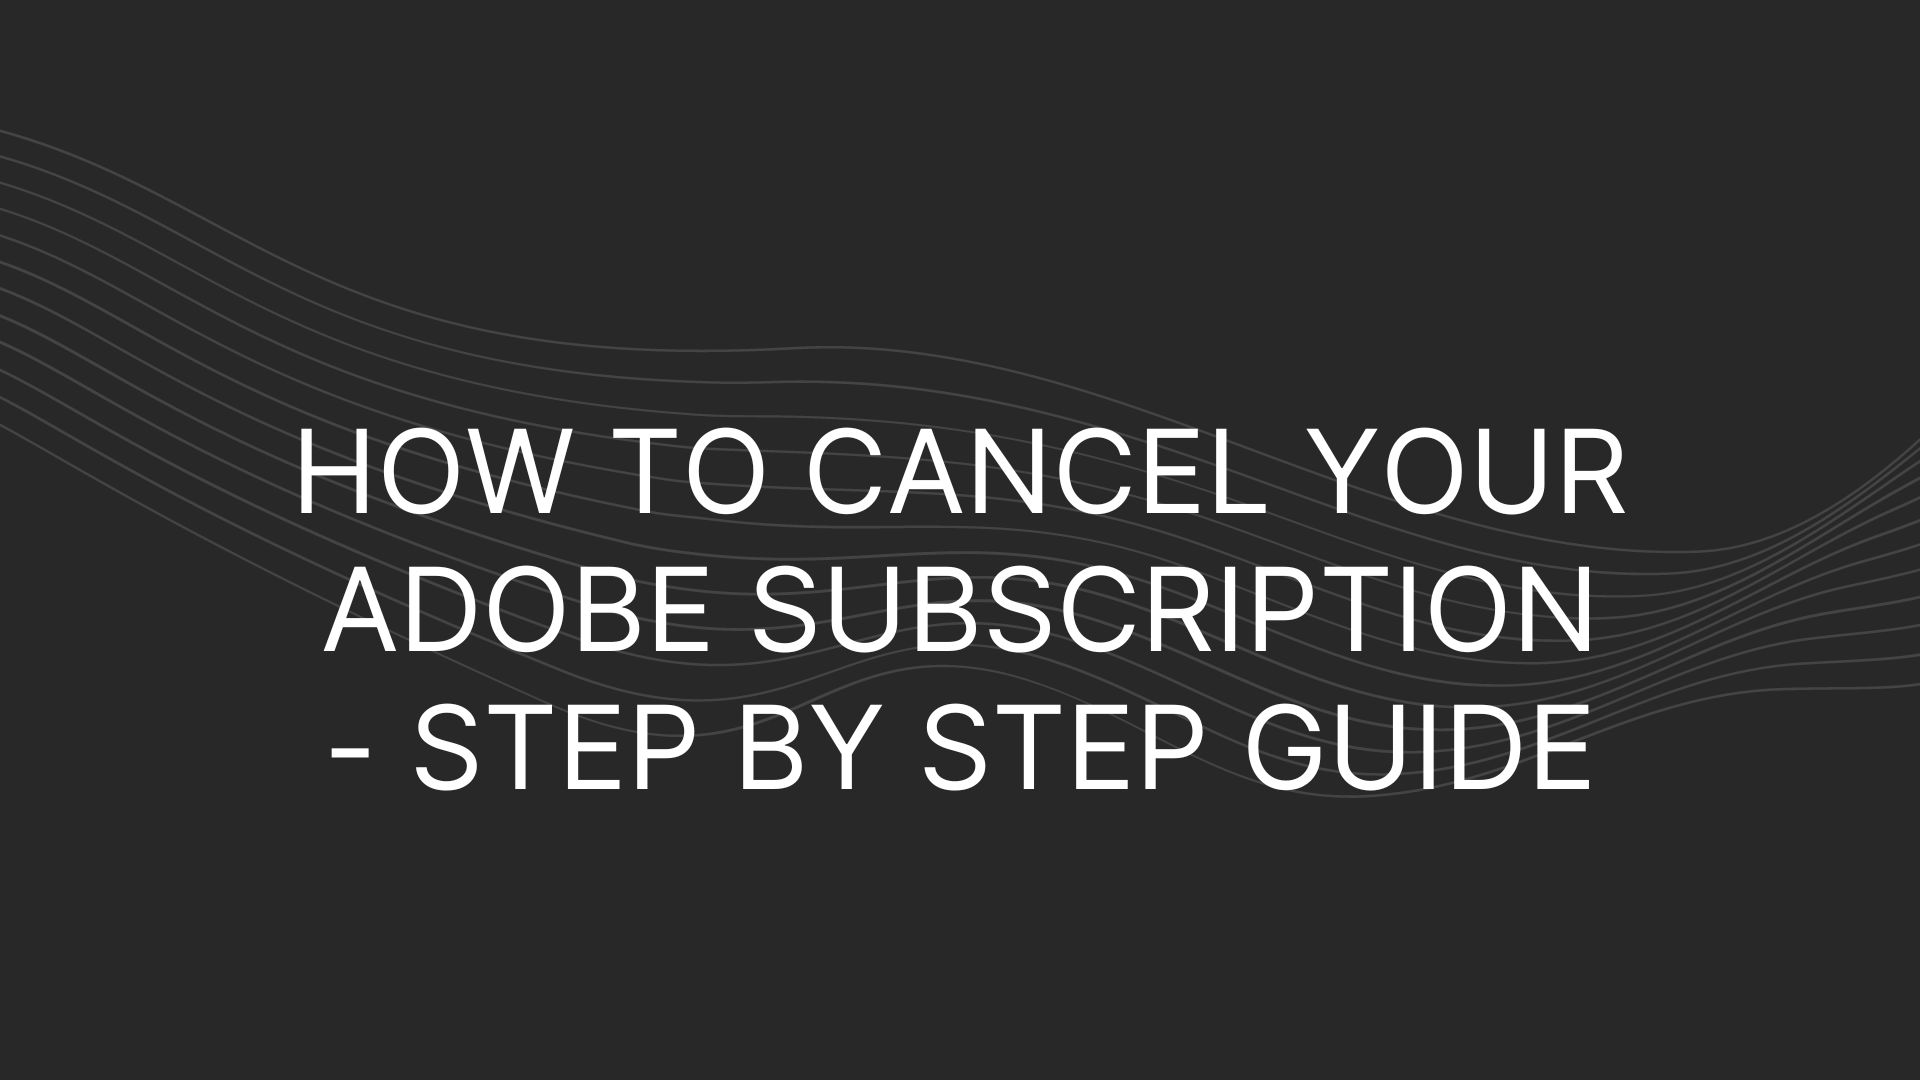 How to Cancel Adobe Subscription